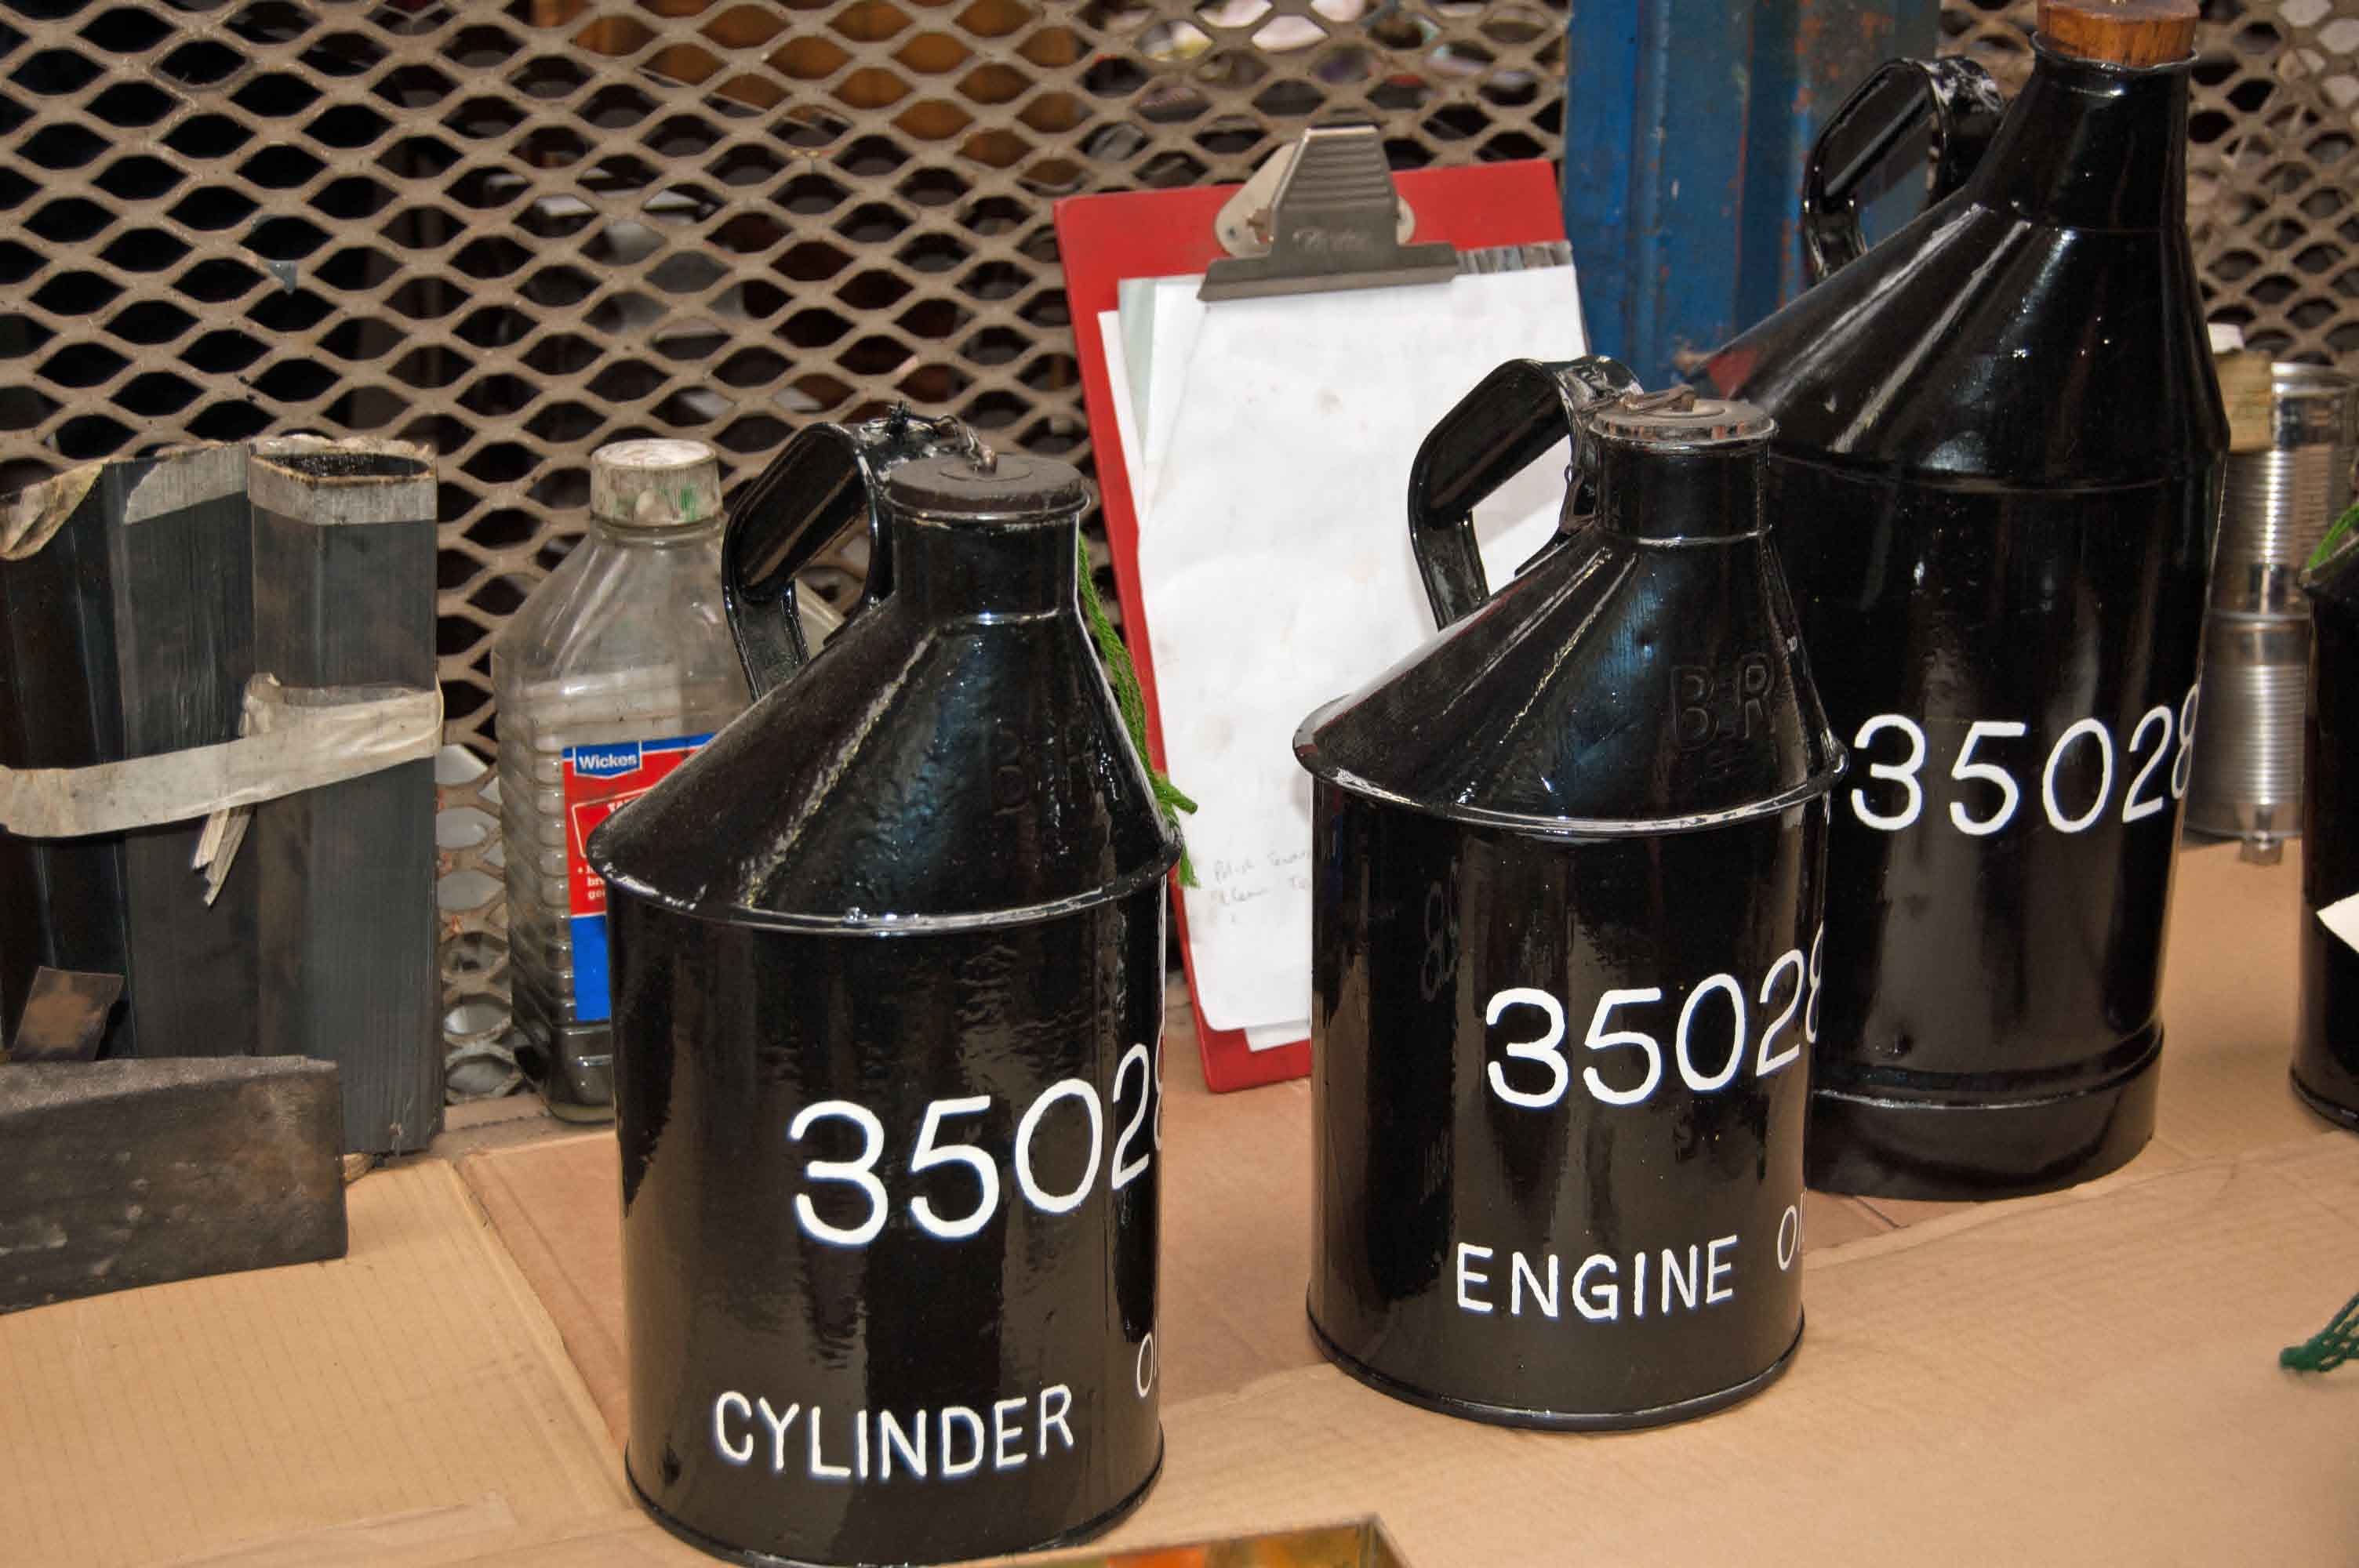 Each of the oil bottles is labelled